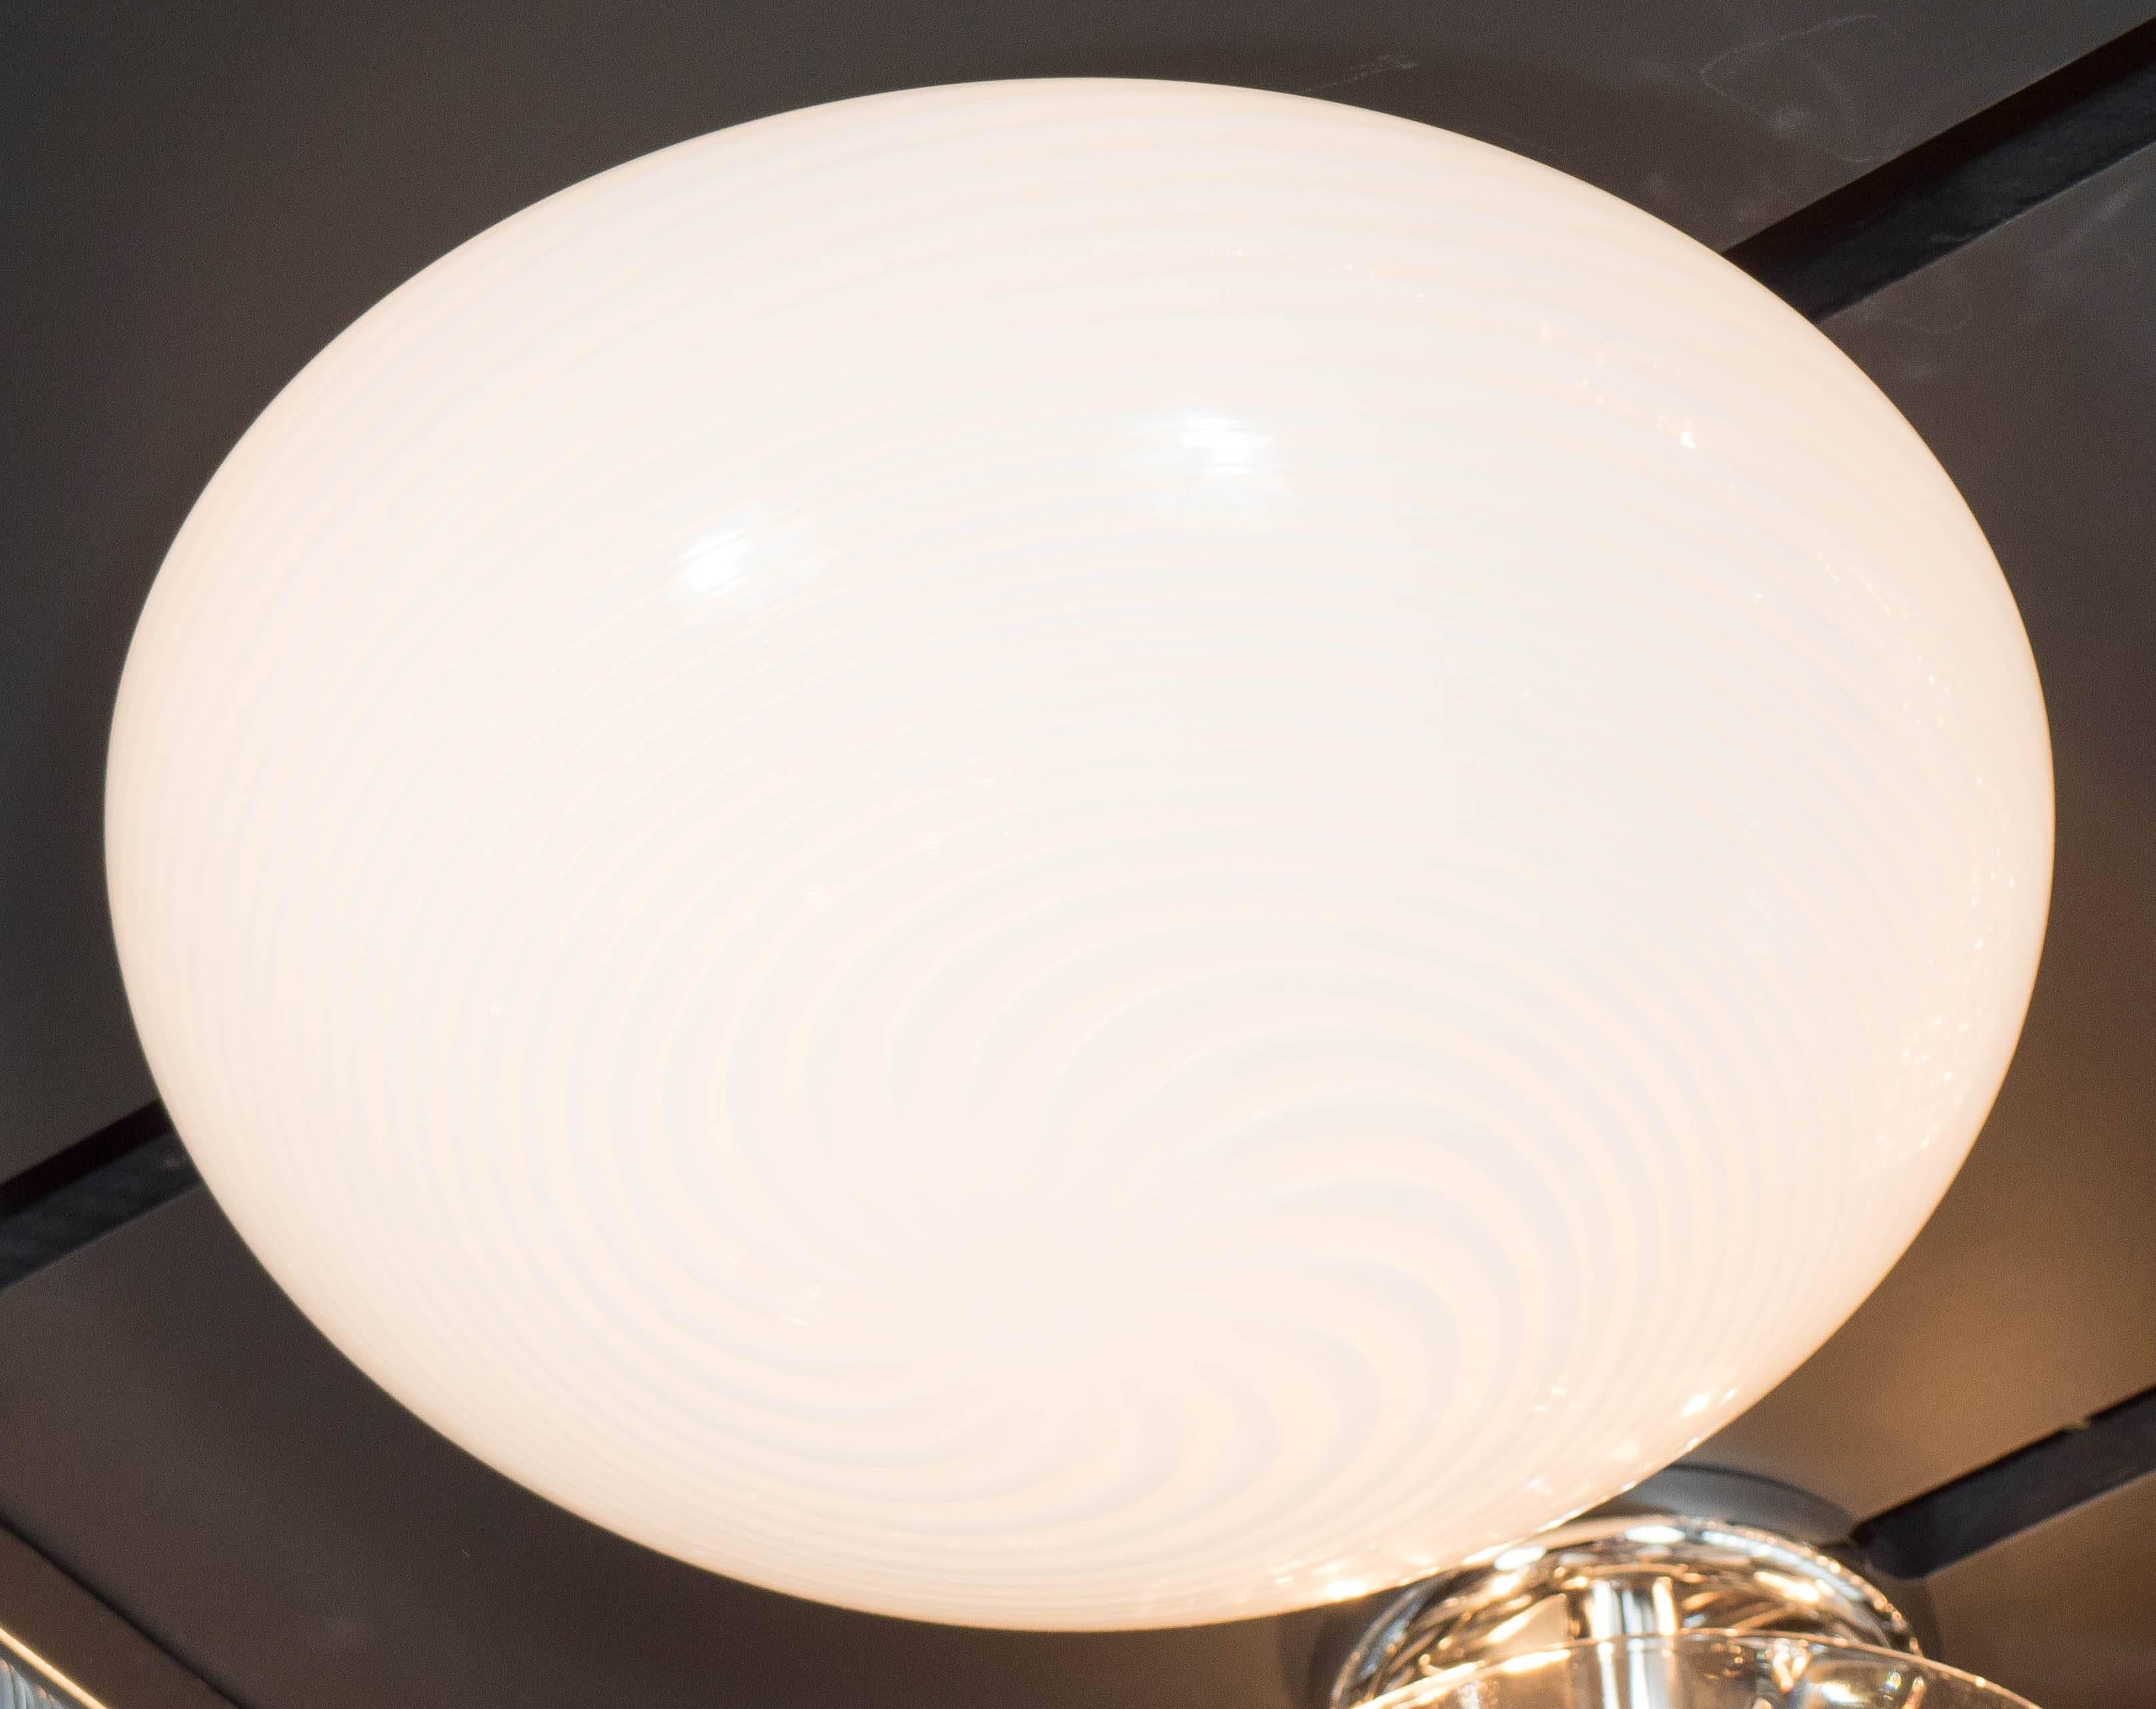 This sophisticated Mid-Century Modernist flush mount chandelier by Barbini features a pearl on white swirl Murano glass dome shade. When lit, the glass diffuses the light consistently throughout the shade enhancing the swirl detail. It is newly